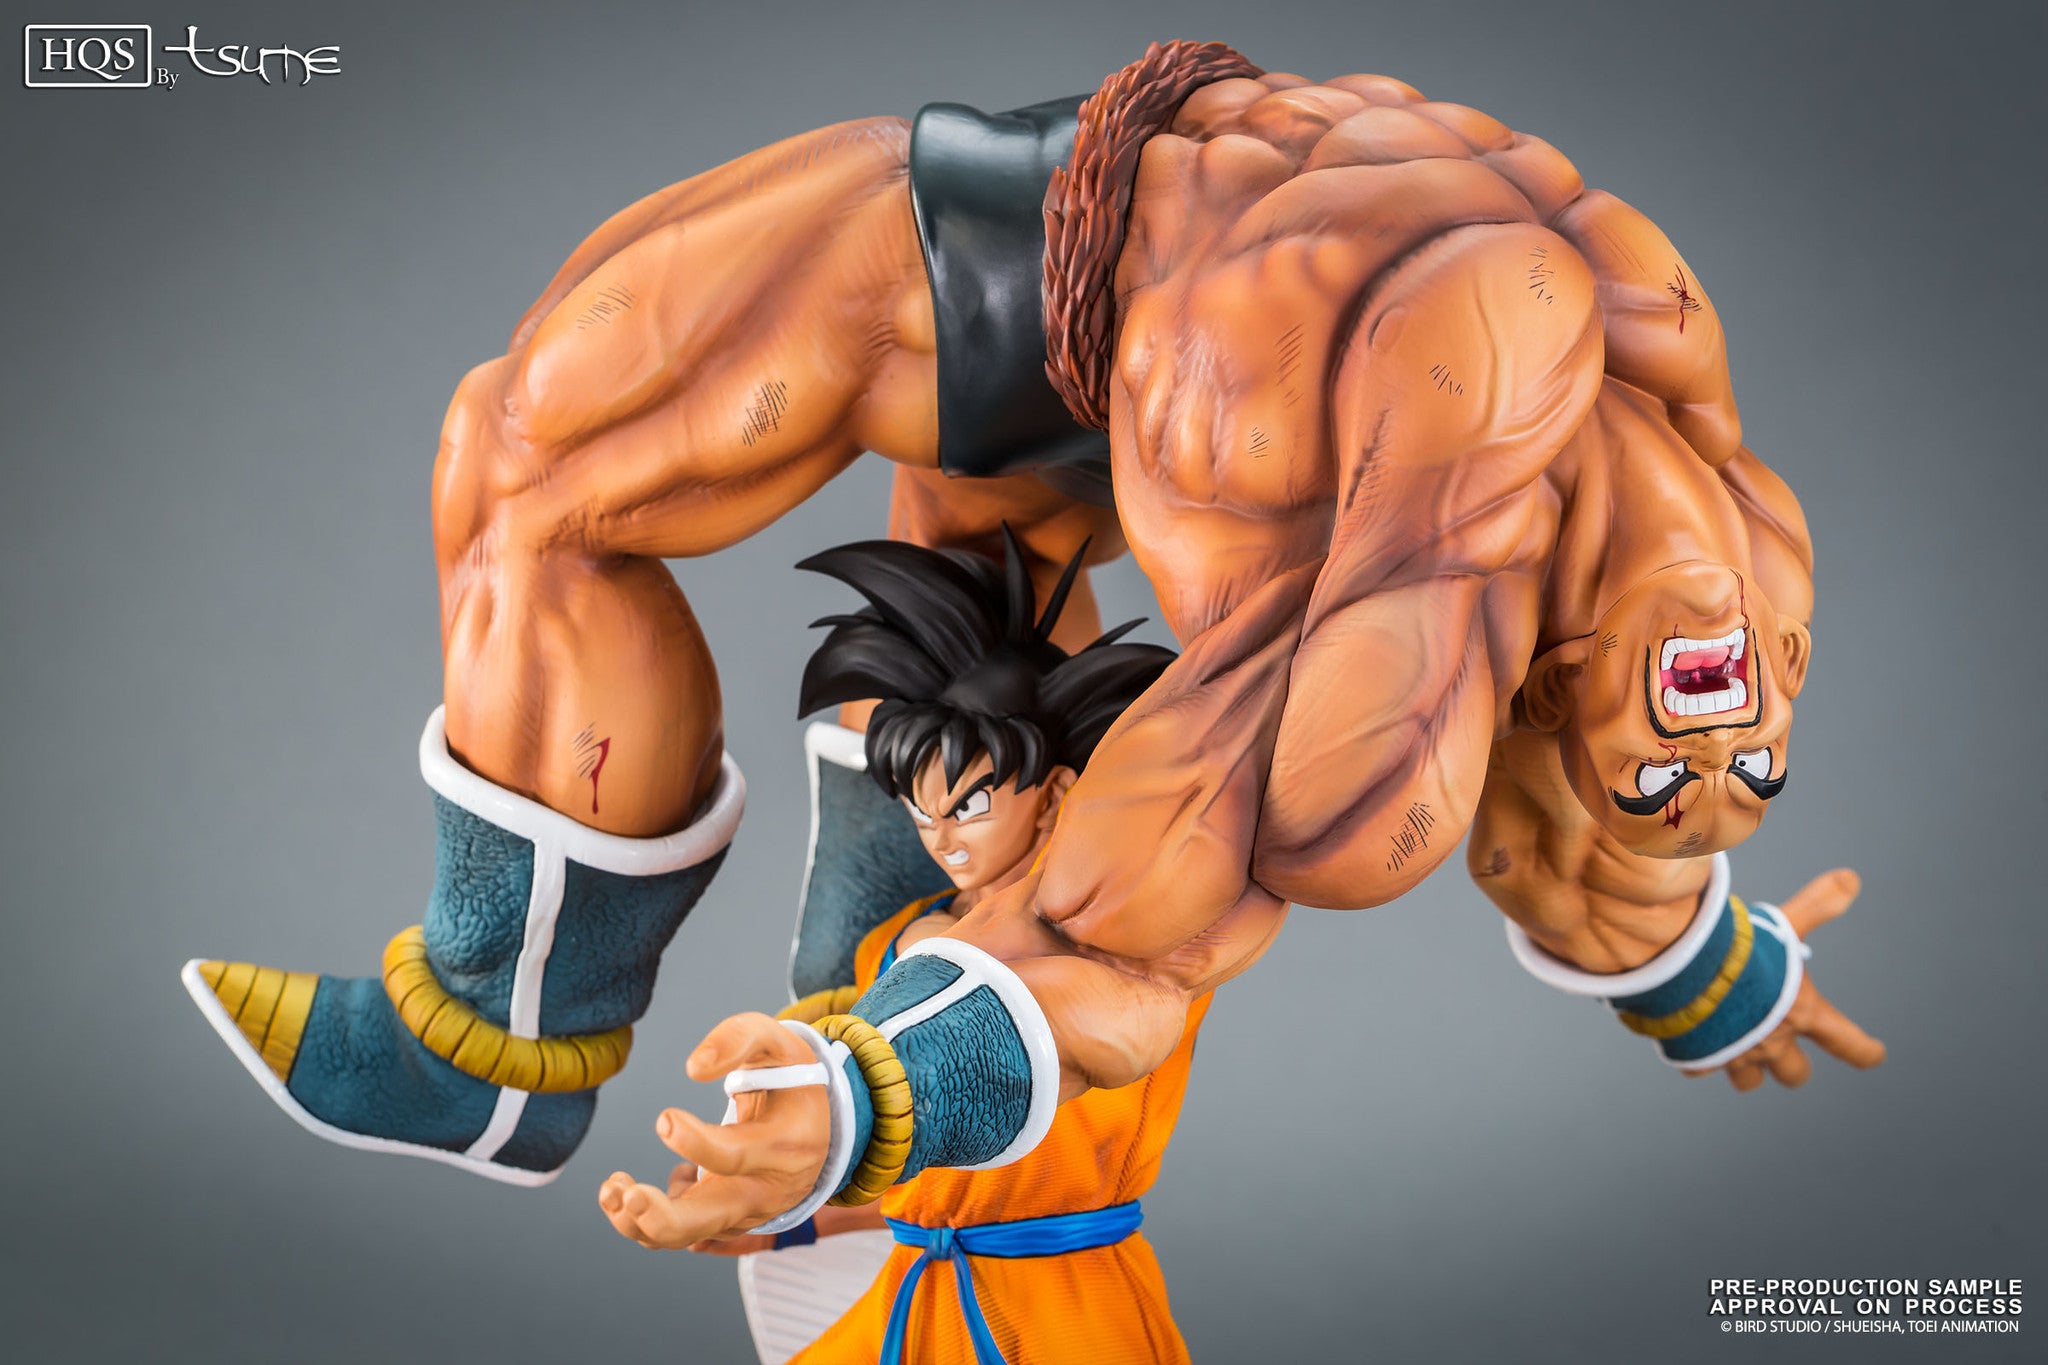 Tsume-Art - High Quality Statue - Dragon Ball - The Quiet Wrath of Son Goku - Marvelous Toys